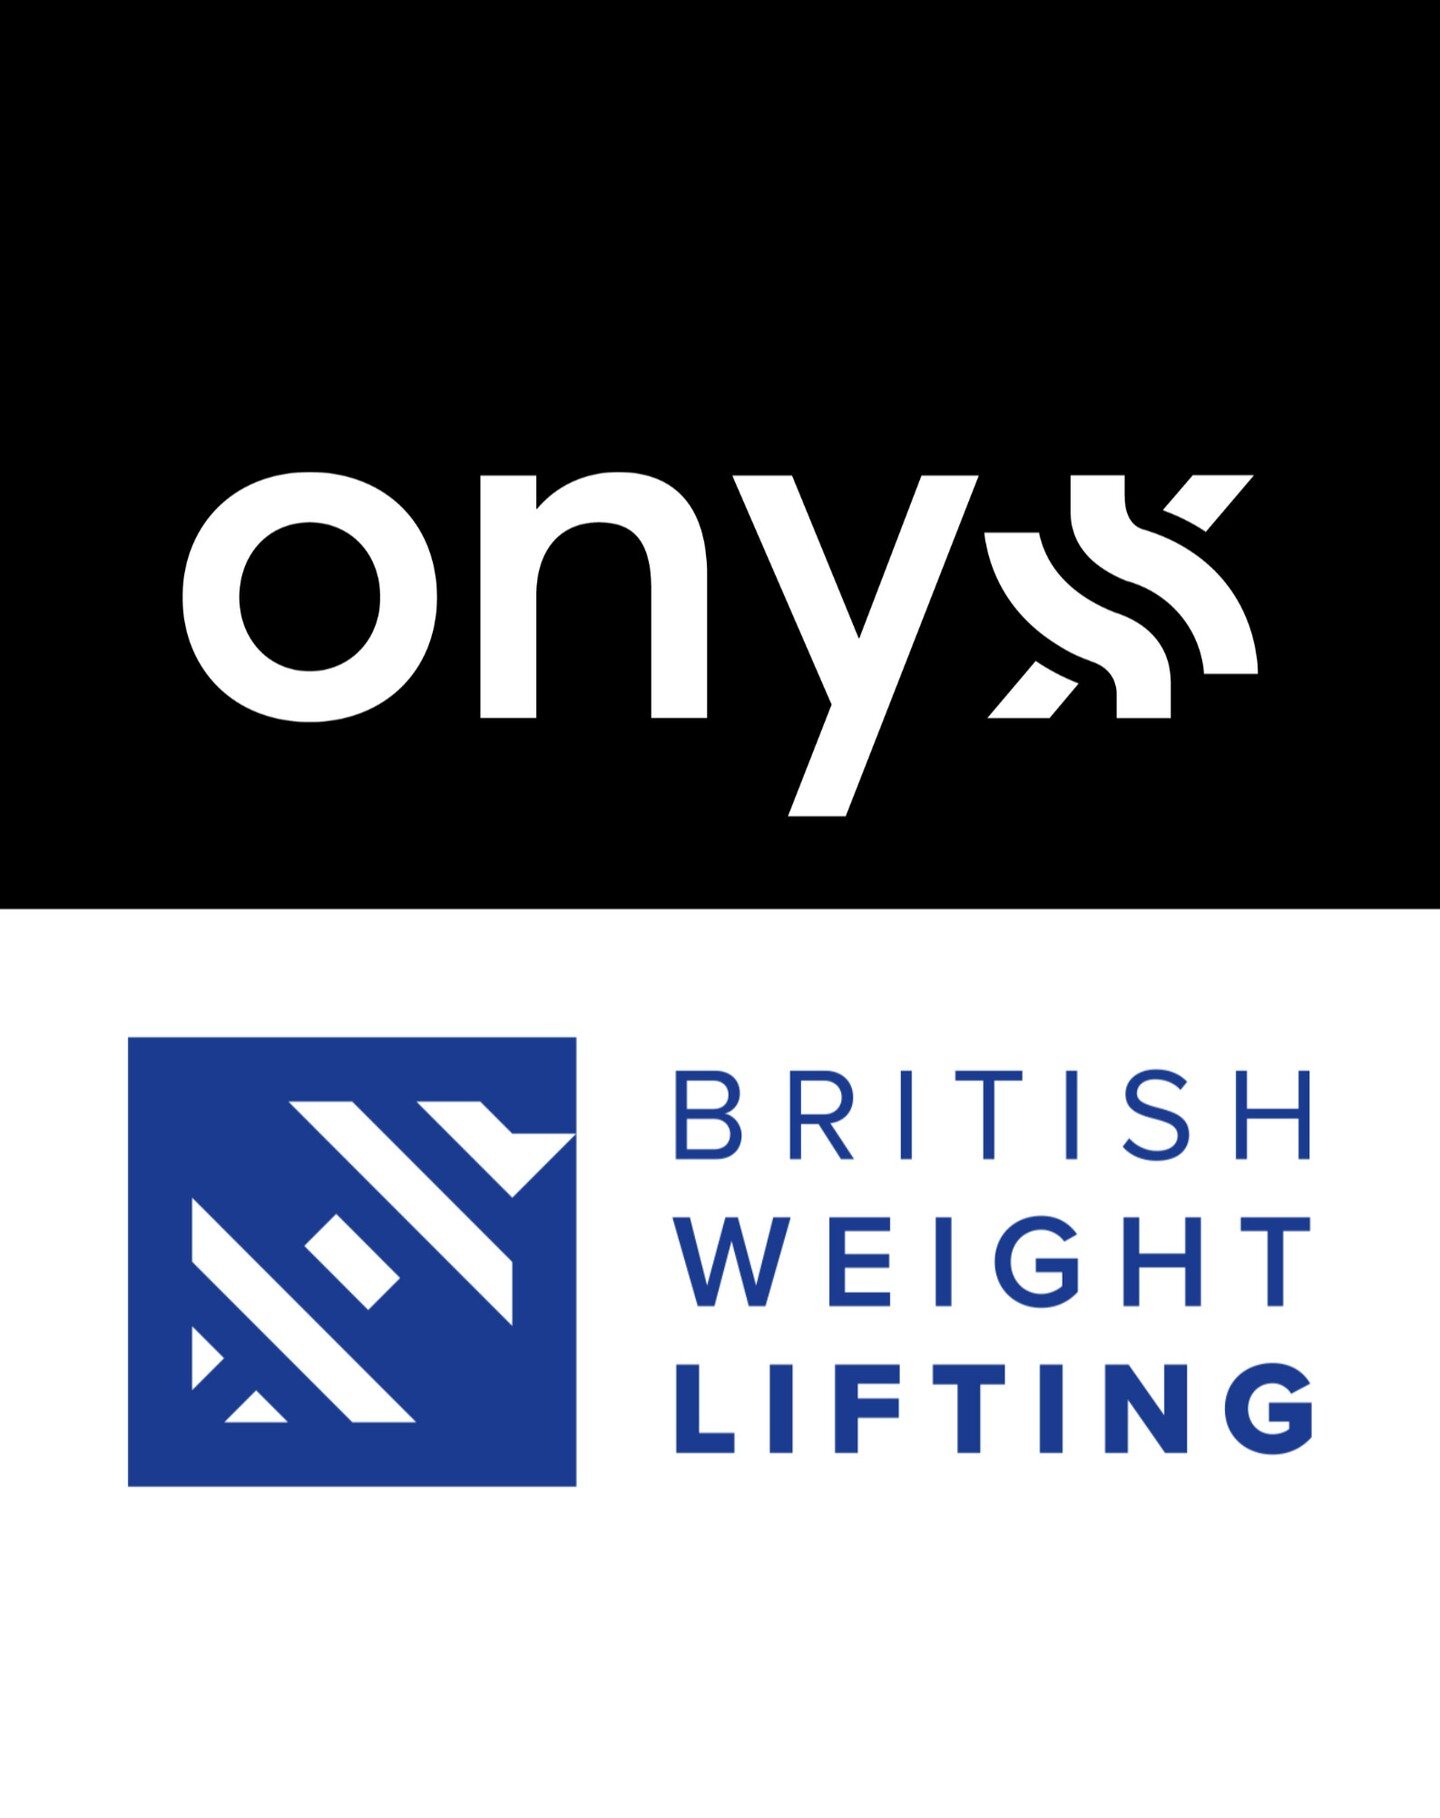 It's official! We are a British Weightlifting Club.

We are excited to announce the launch of our weightlifting club at Onyx Gym, starting from Sunday the 7th from 12:30-2Pm and continuing on the following Sundays at the same time. This club is desig